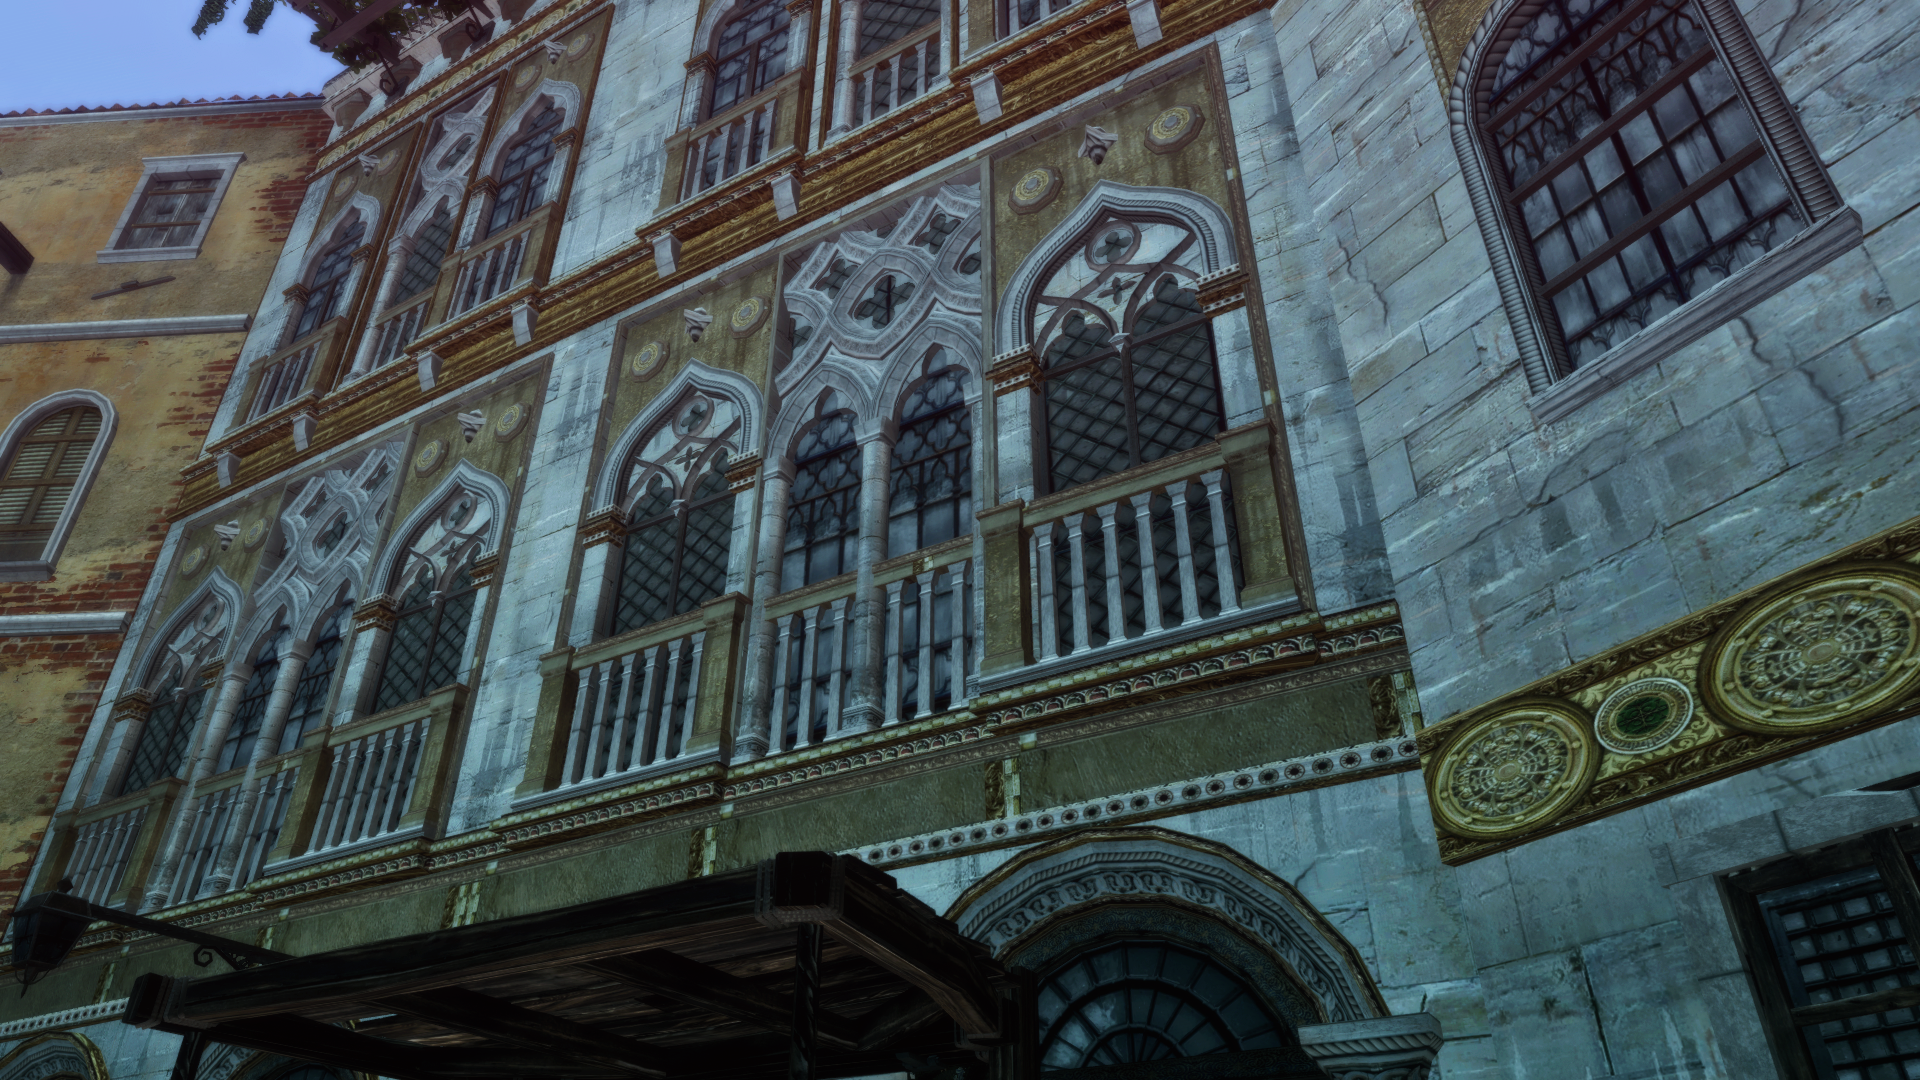 Florence image - Assassin's Creed 2 Retexture Project mod for Assassin's  Creed II - ModDB